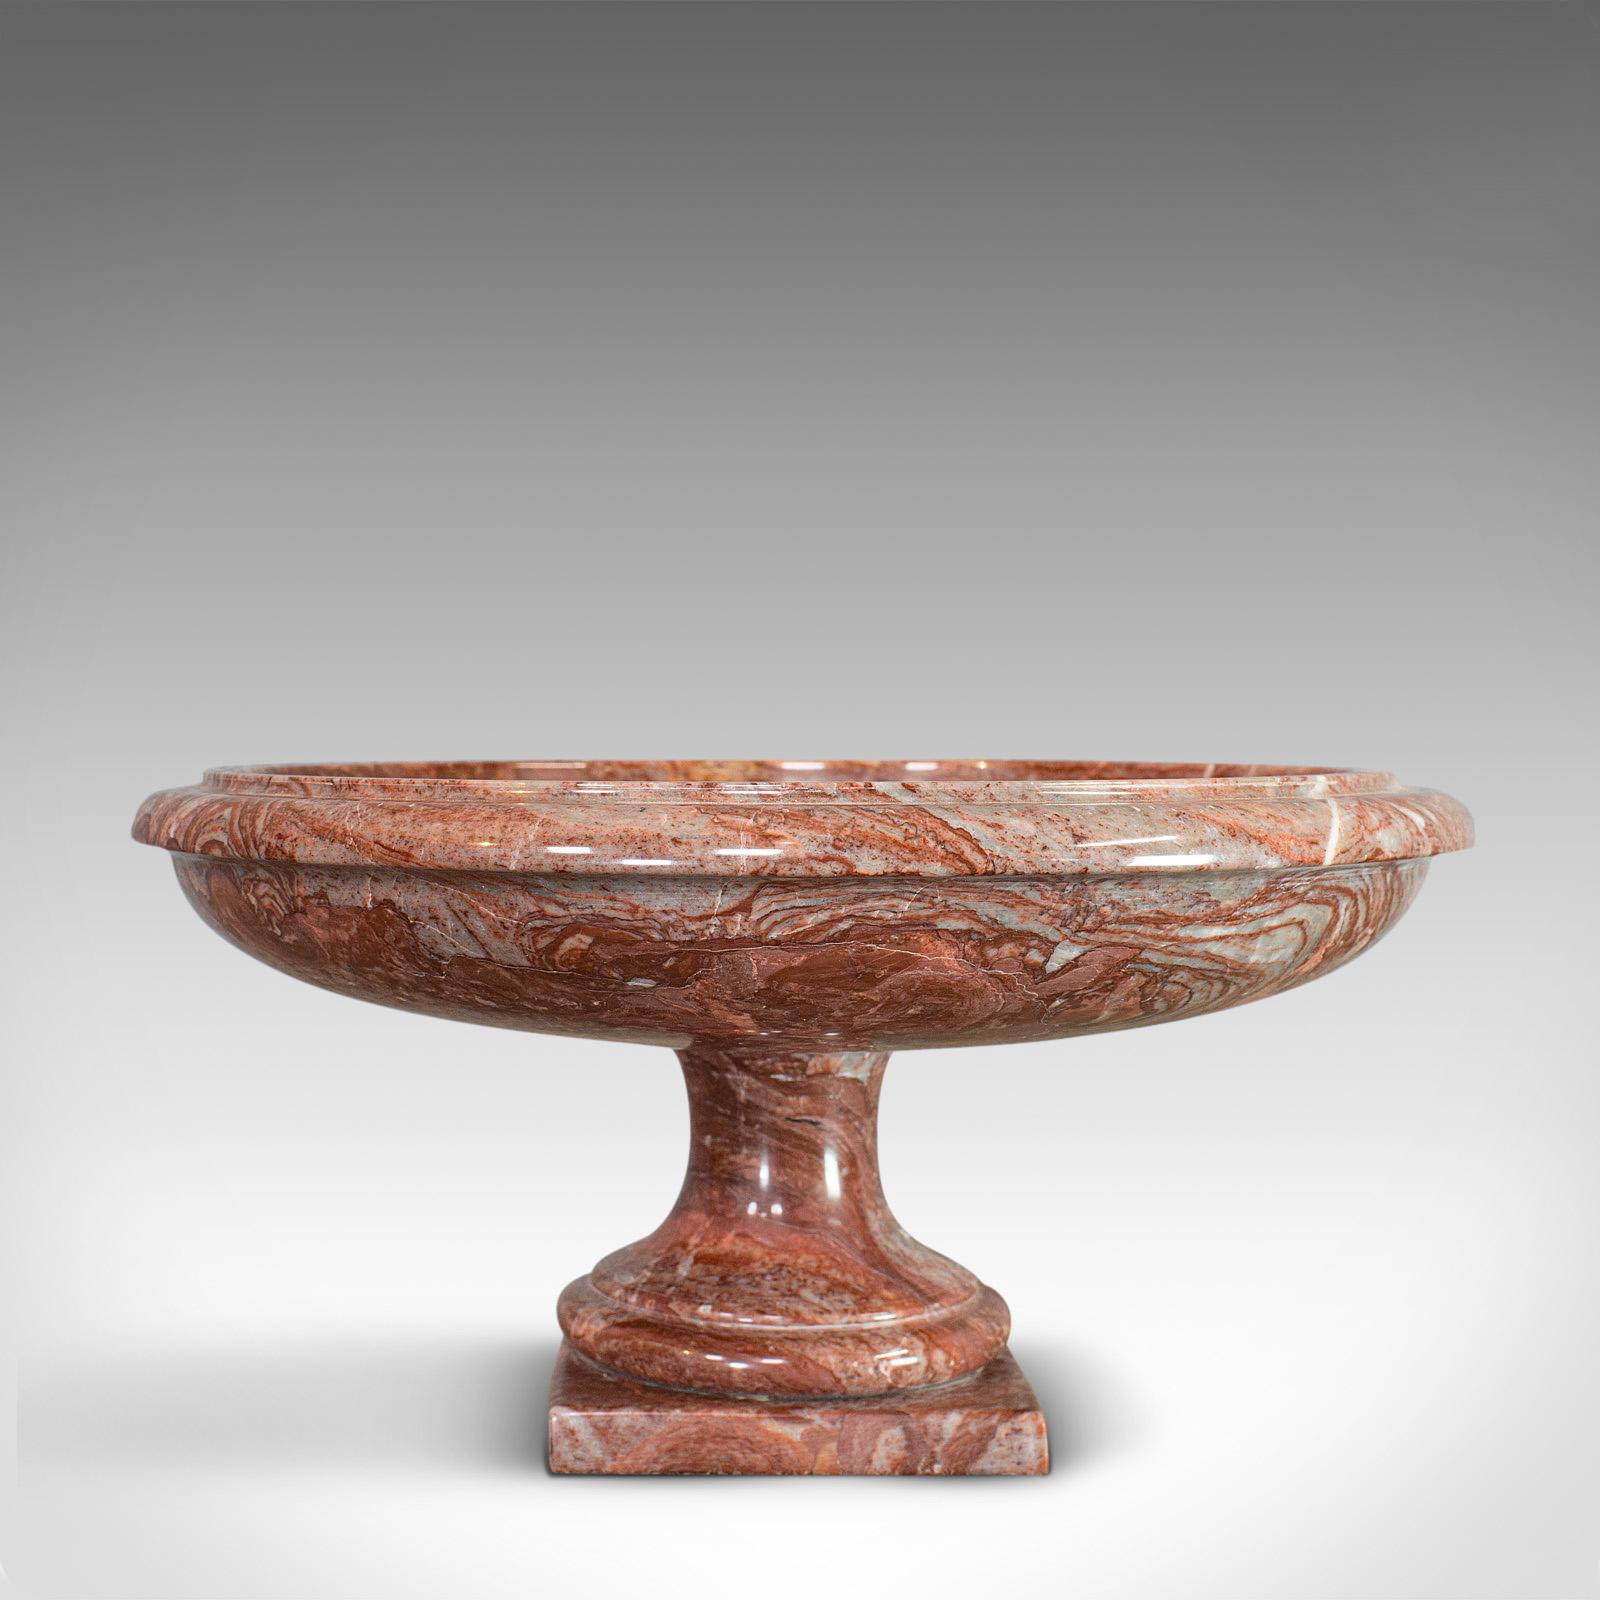 This is a vintage marble dish. An English, rosso orobico marble decorative fruit bowl or jardiniere and dating to the late 20th century.

Deep marble patterns and Fine form
Displays a desirable aged patina
Polished rosso orobico marble shows